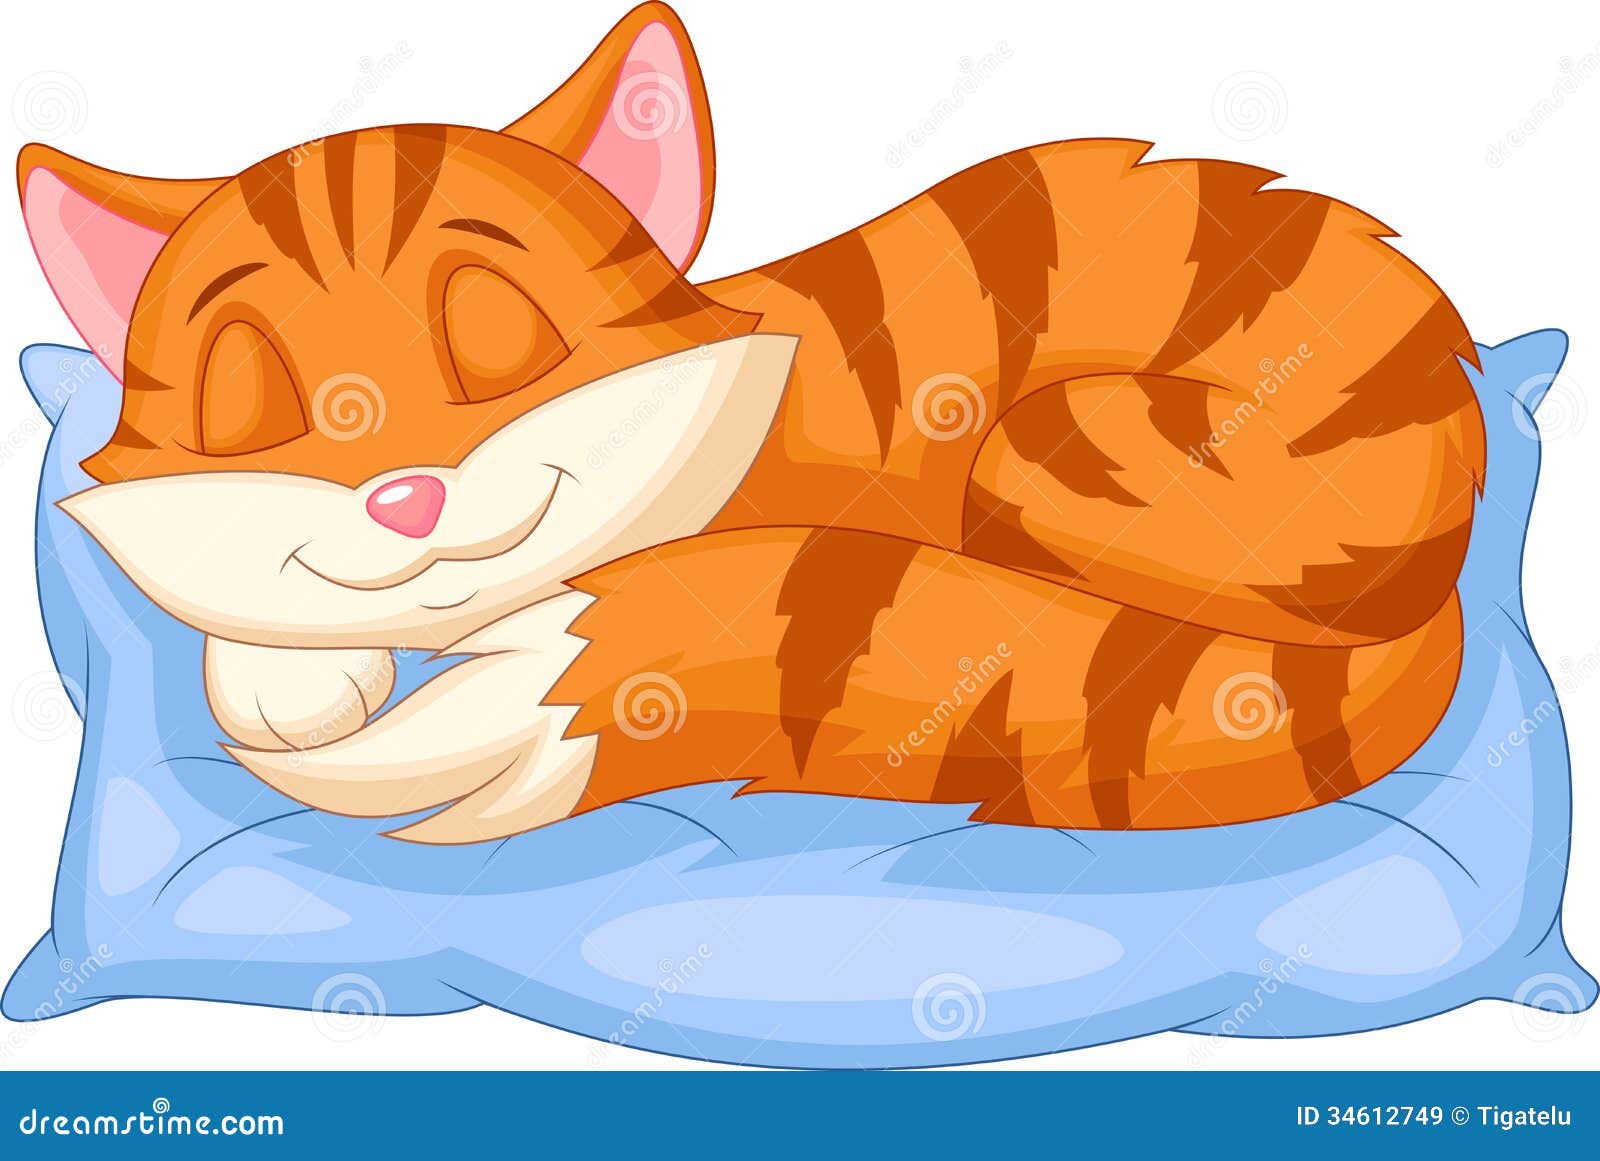 cat bed clipart - photo #24